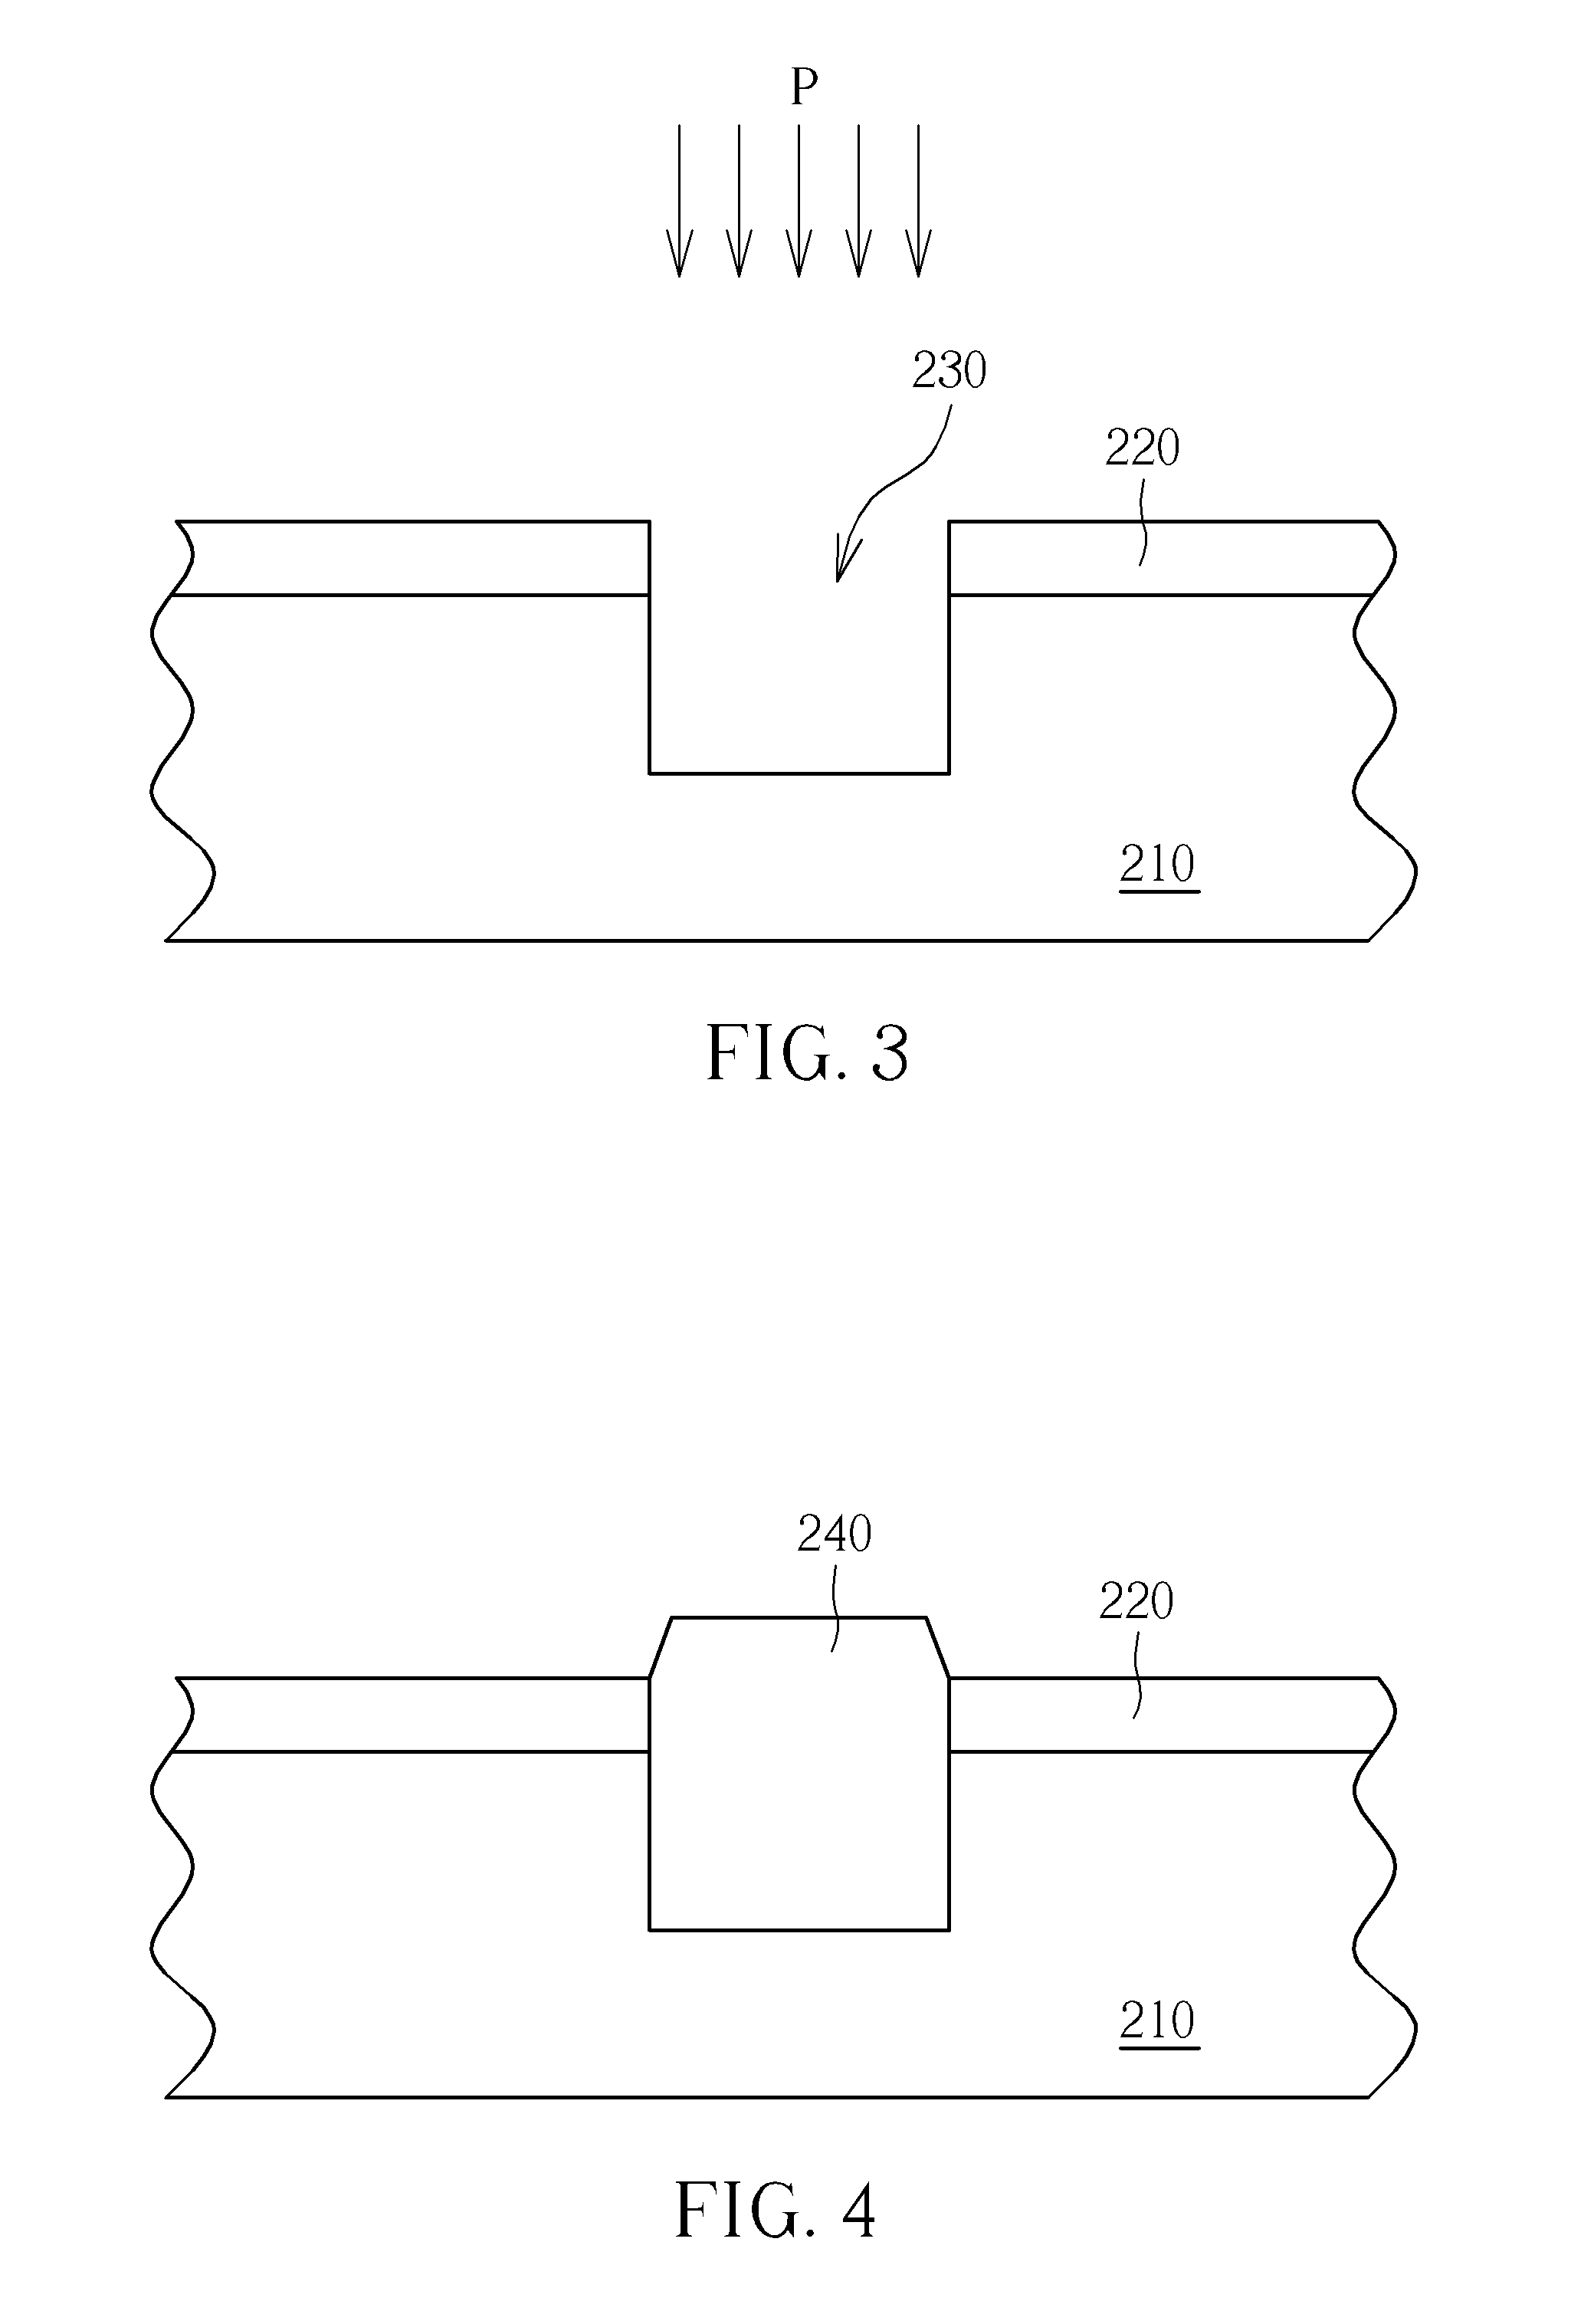 Method of fabricating an epitaxial layer